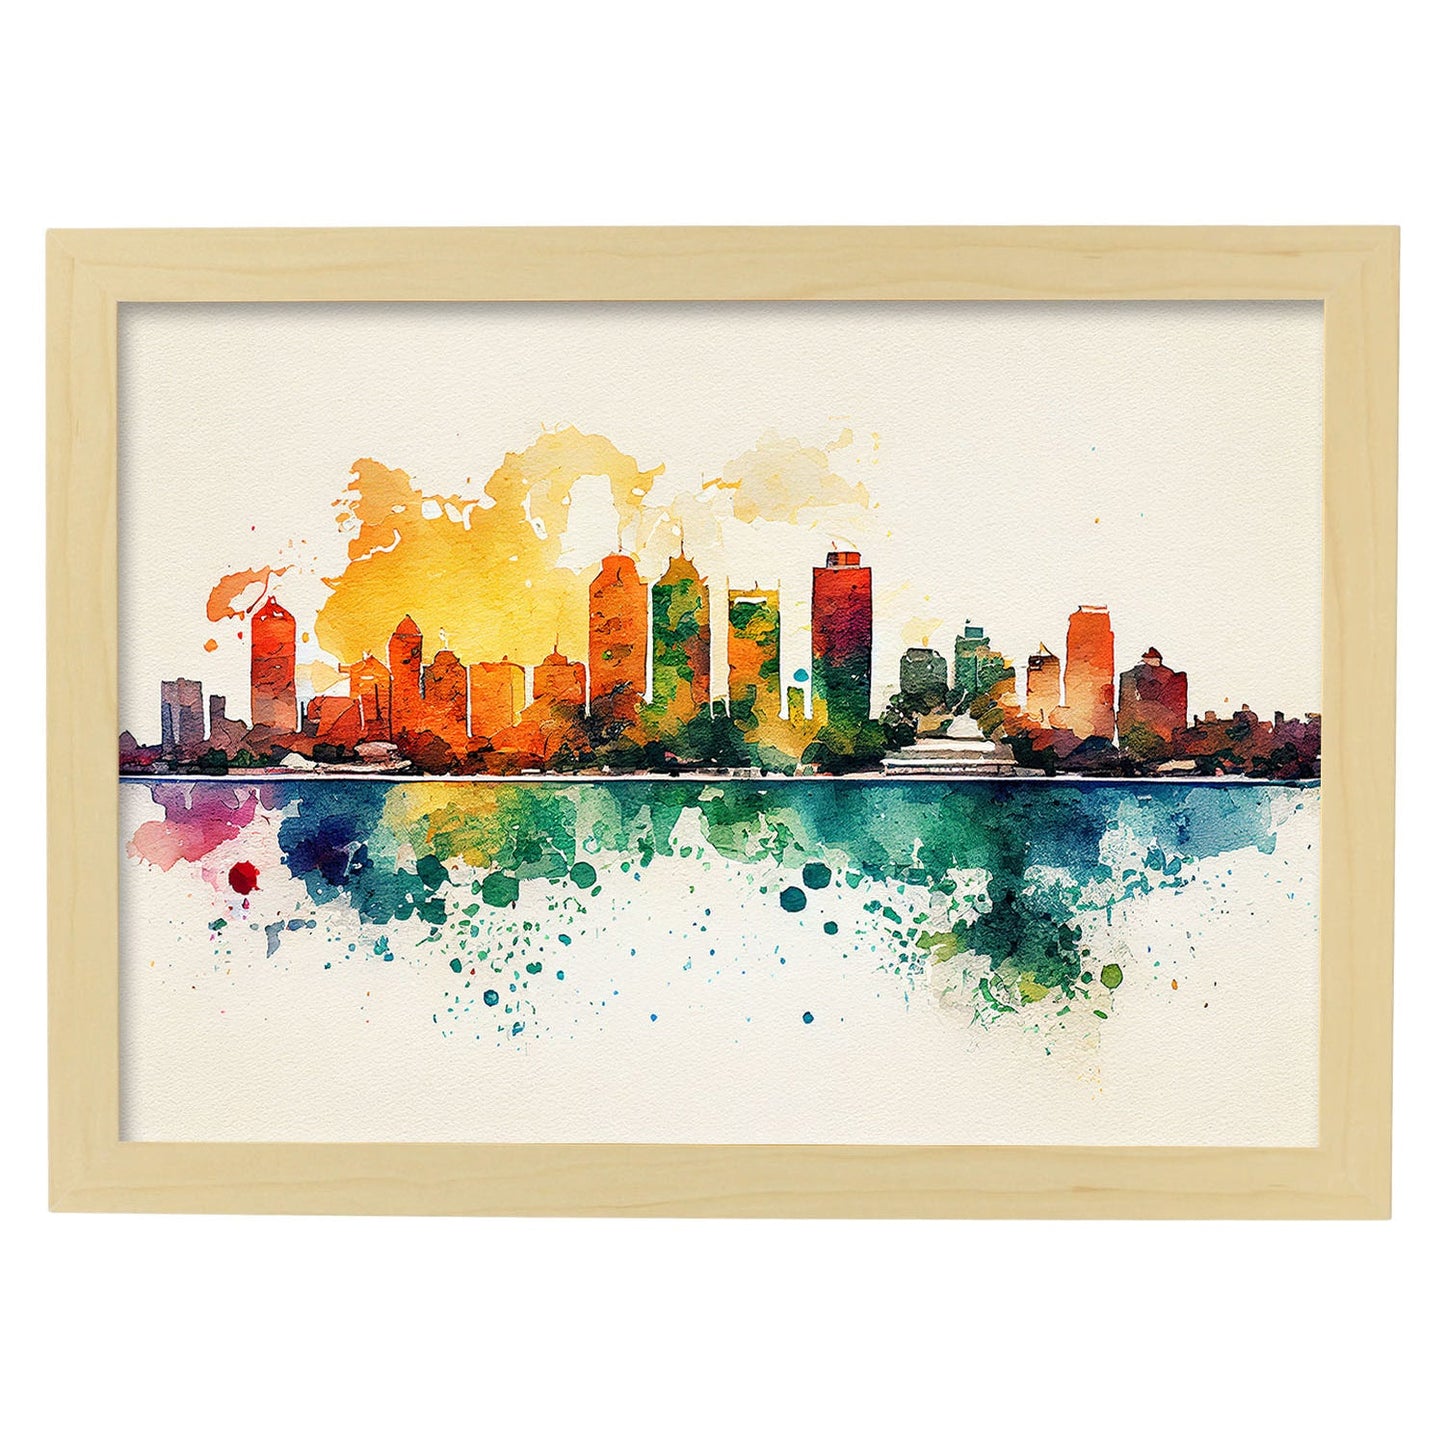 Nacnic watercolor of a skyline of the city of Cancun_2. Aesthetic Wall Art Prints for Bedroom or Living Room Design.-Artwork-Nacnic-A4-Marco Madera Clara-Nacnic Estudio SL